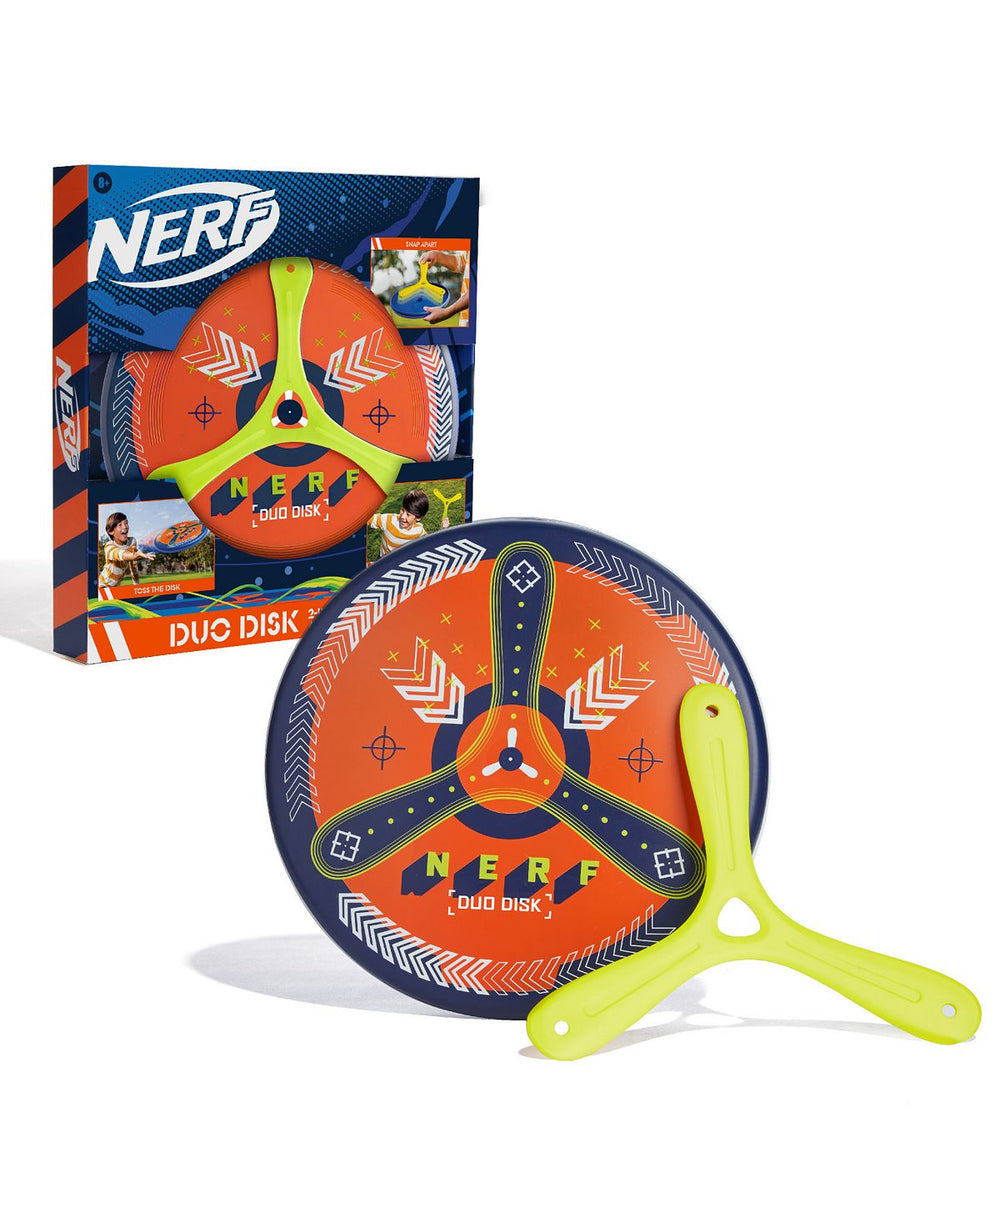 Nerf Boomdisk 2-in-1 Boomerang and Frisbee Outdoor Game Set